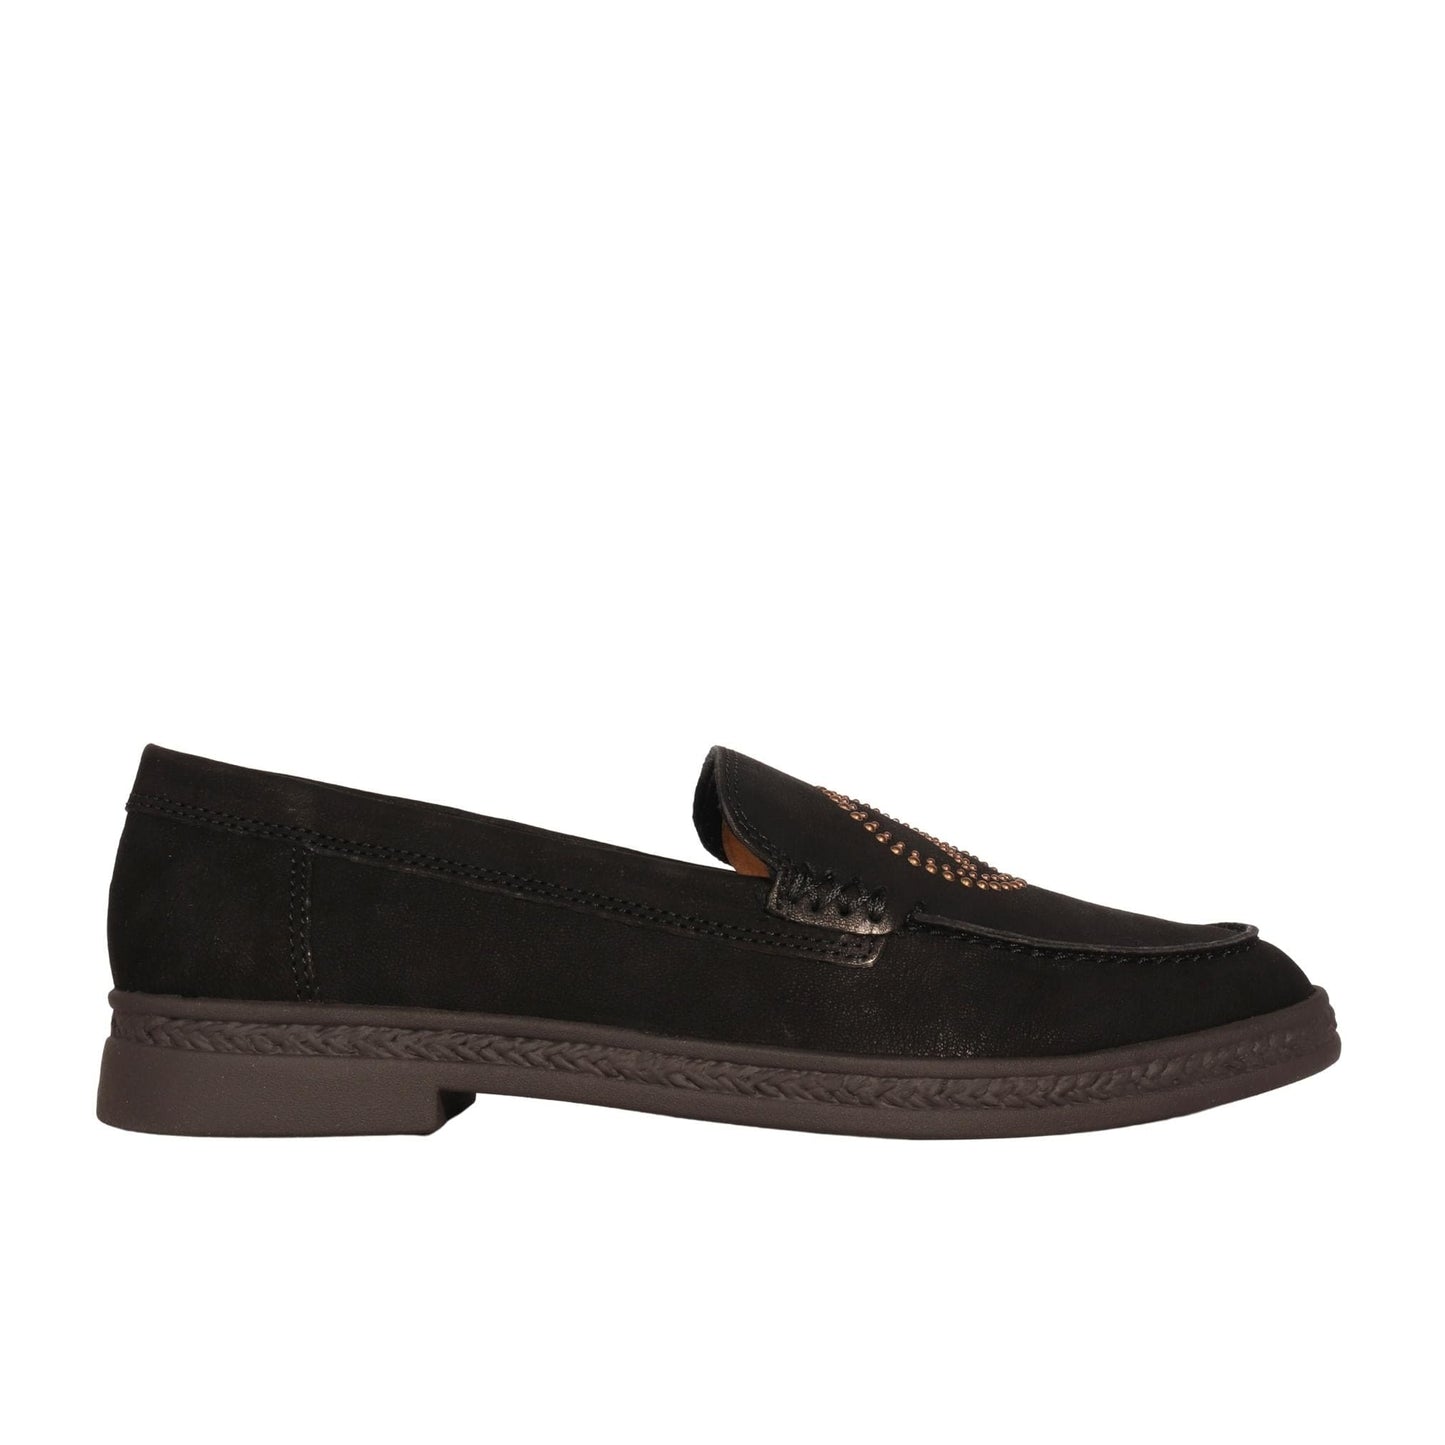 LUCKY BRAND Womens Shoes 38.5 / Black LUCKY BRAND - Redmy Loafer Flats Women's Shoes